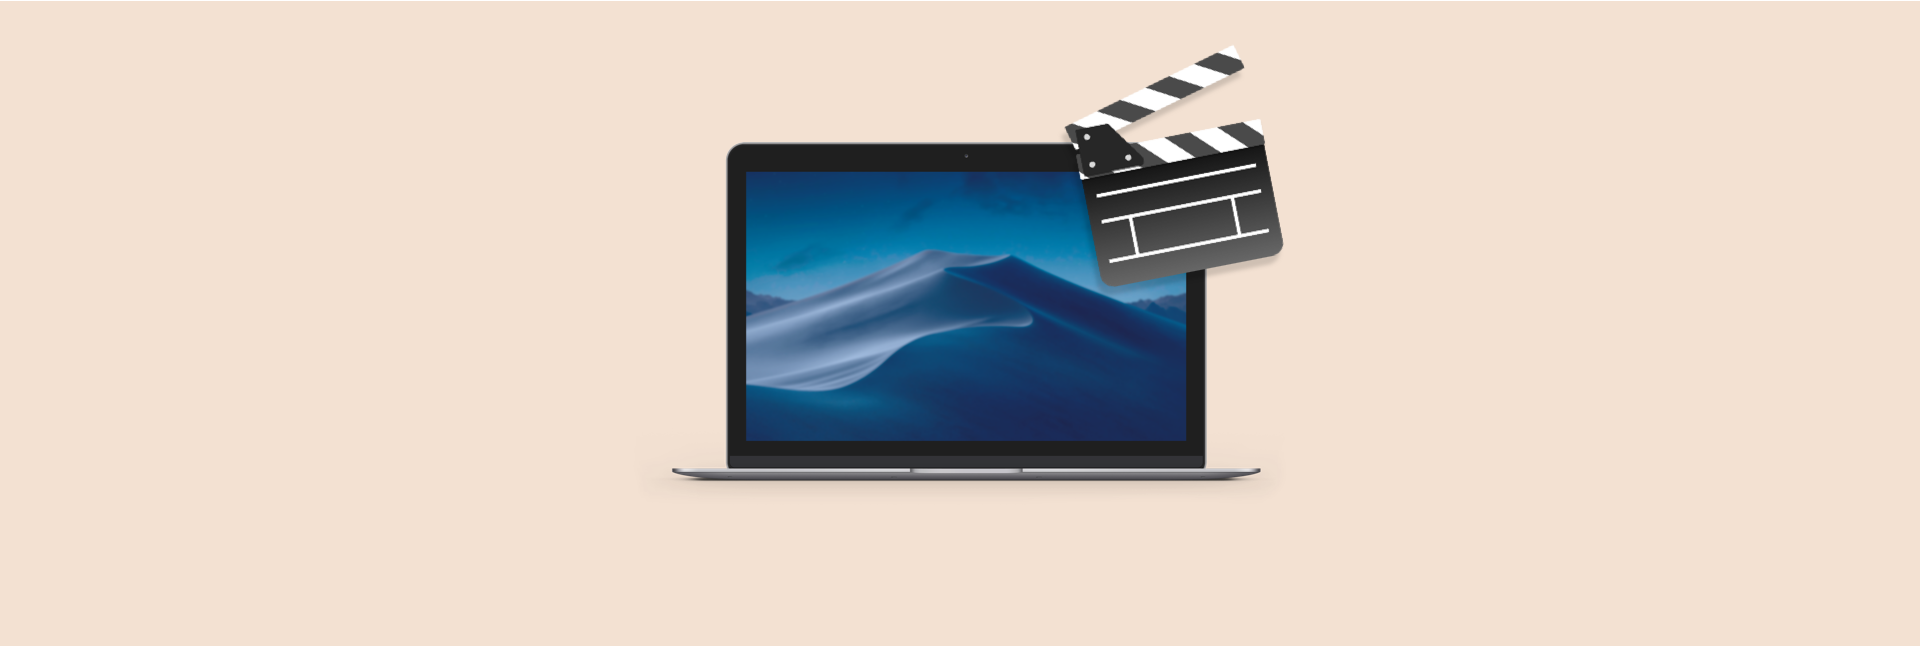 microsoft movie and tv app for mac